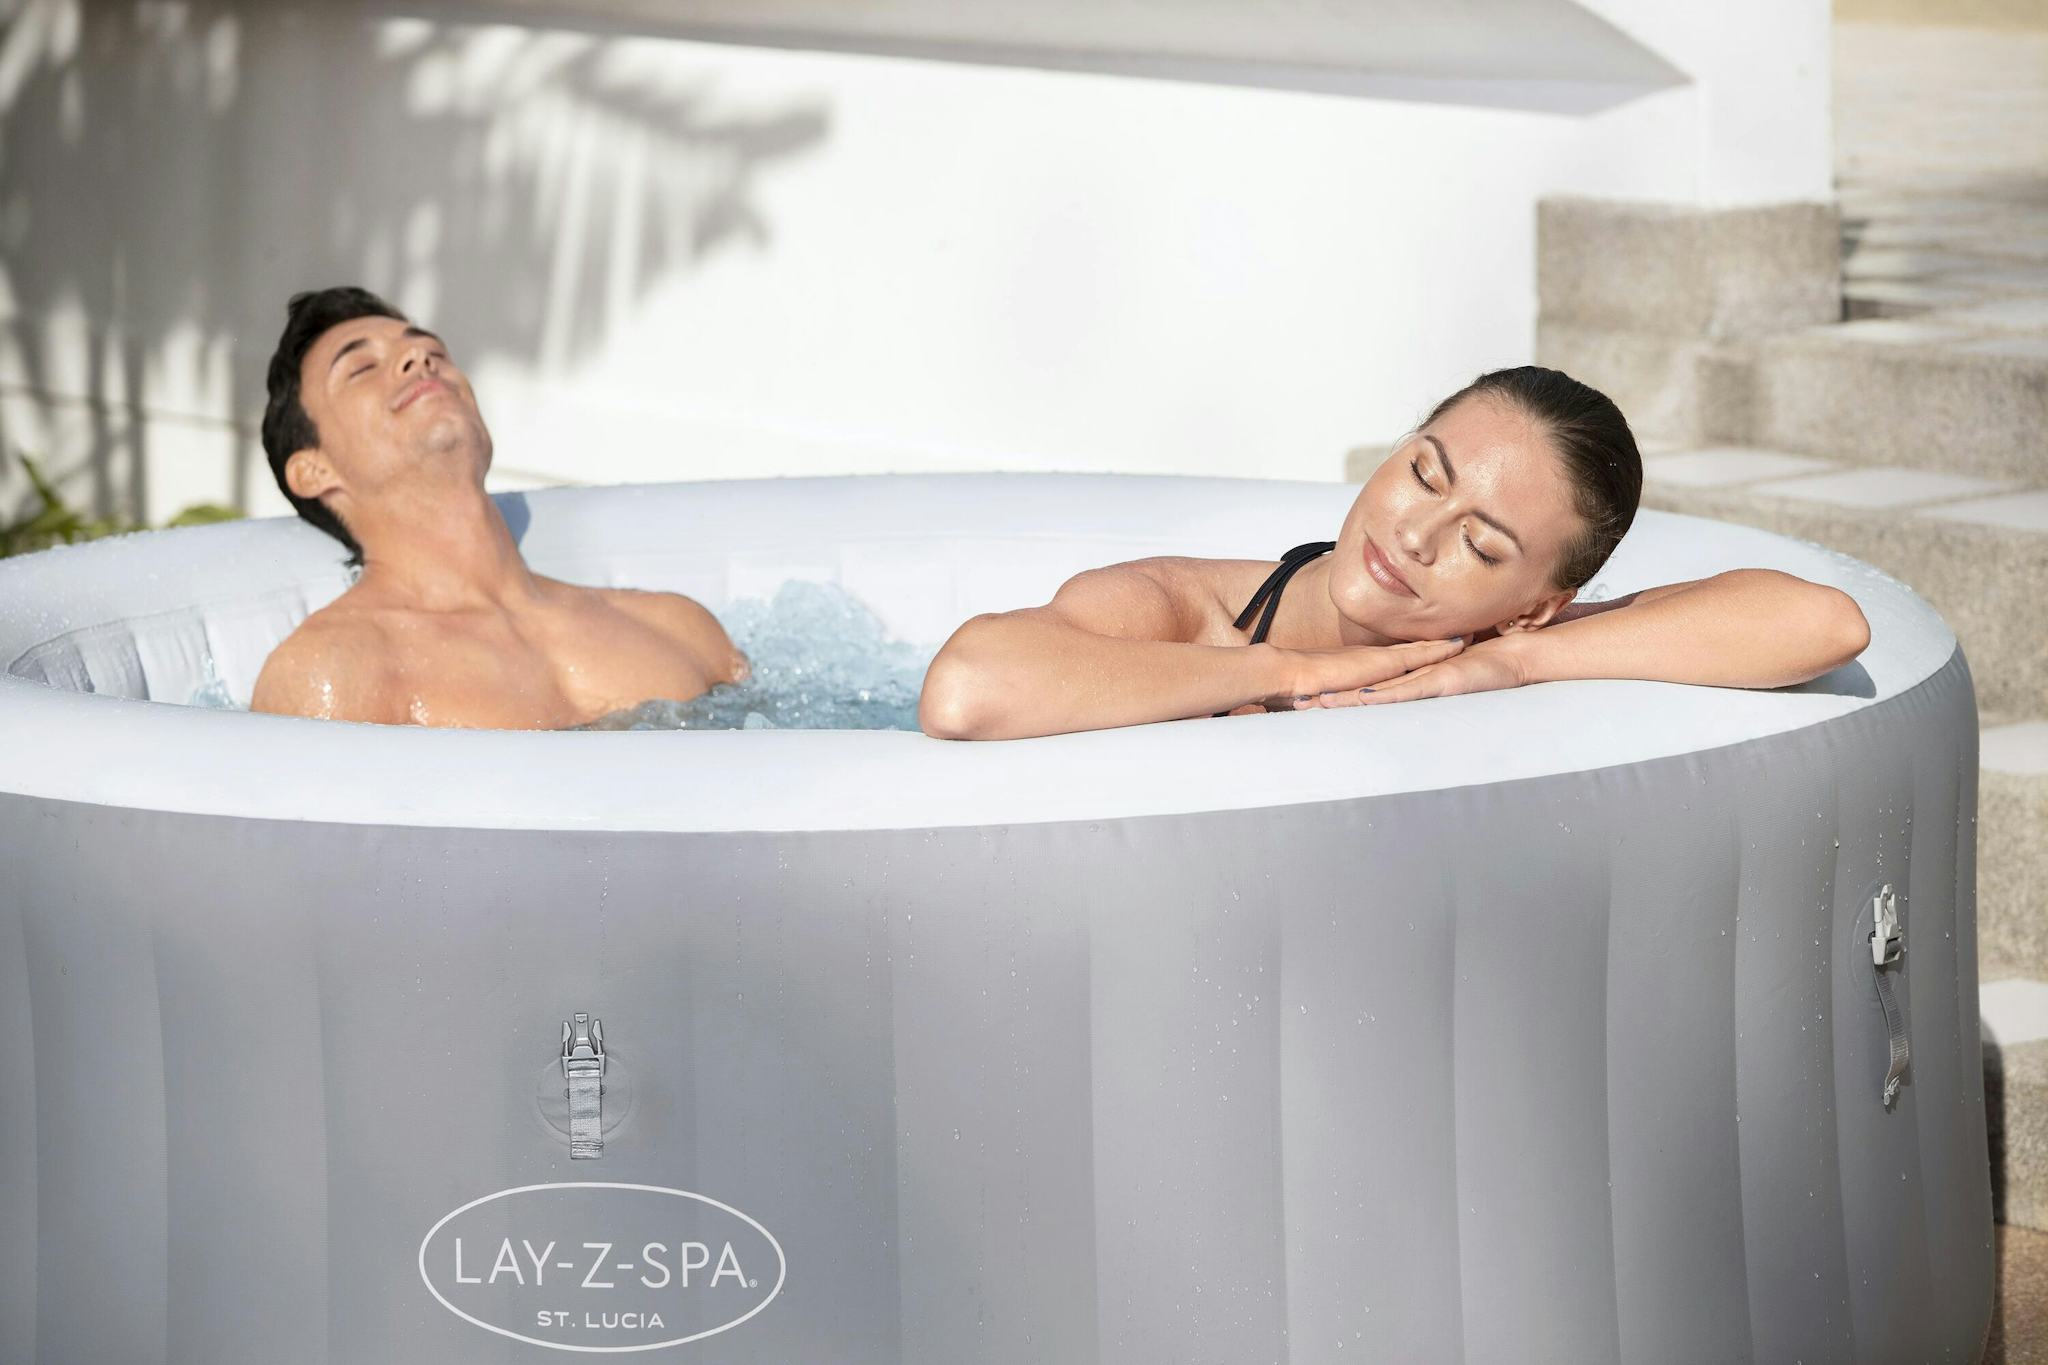 Spas Gonflables Spa gonflable rond St. Lucia AirJet™ Lay-Z-Spa®  2-3 personnes Bestway 17